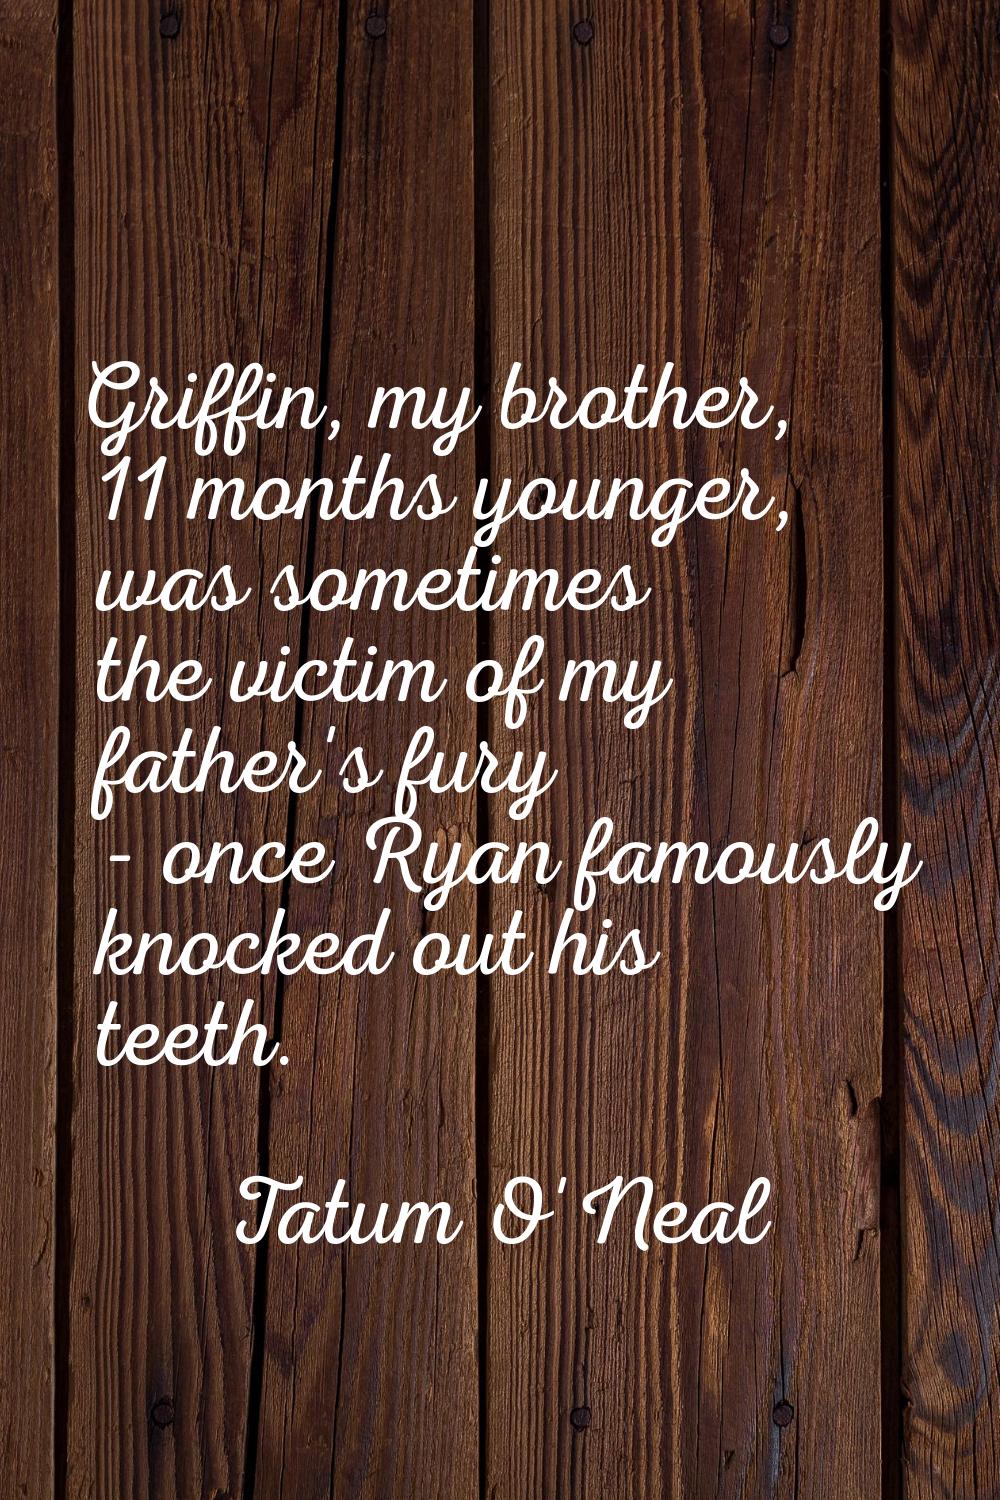 Griffin, my brother, 11 months younger, was sometimes the victim of my father's fury - once Ryan fa